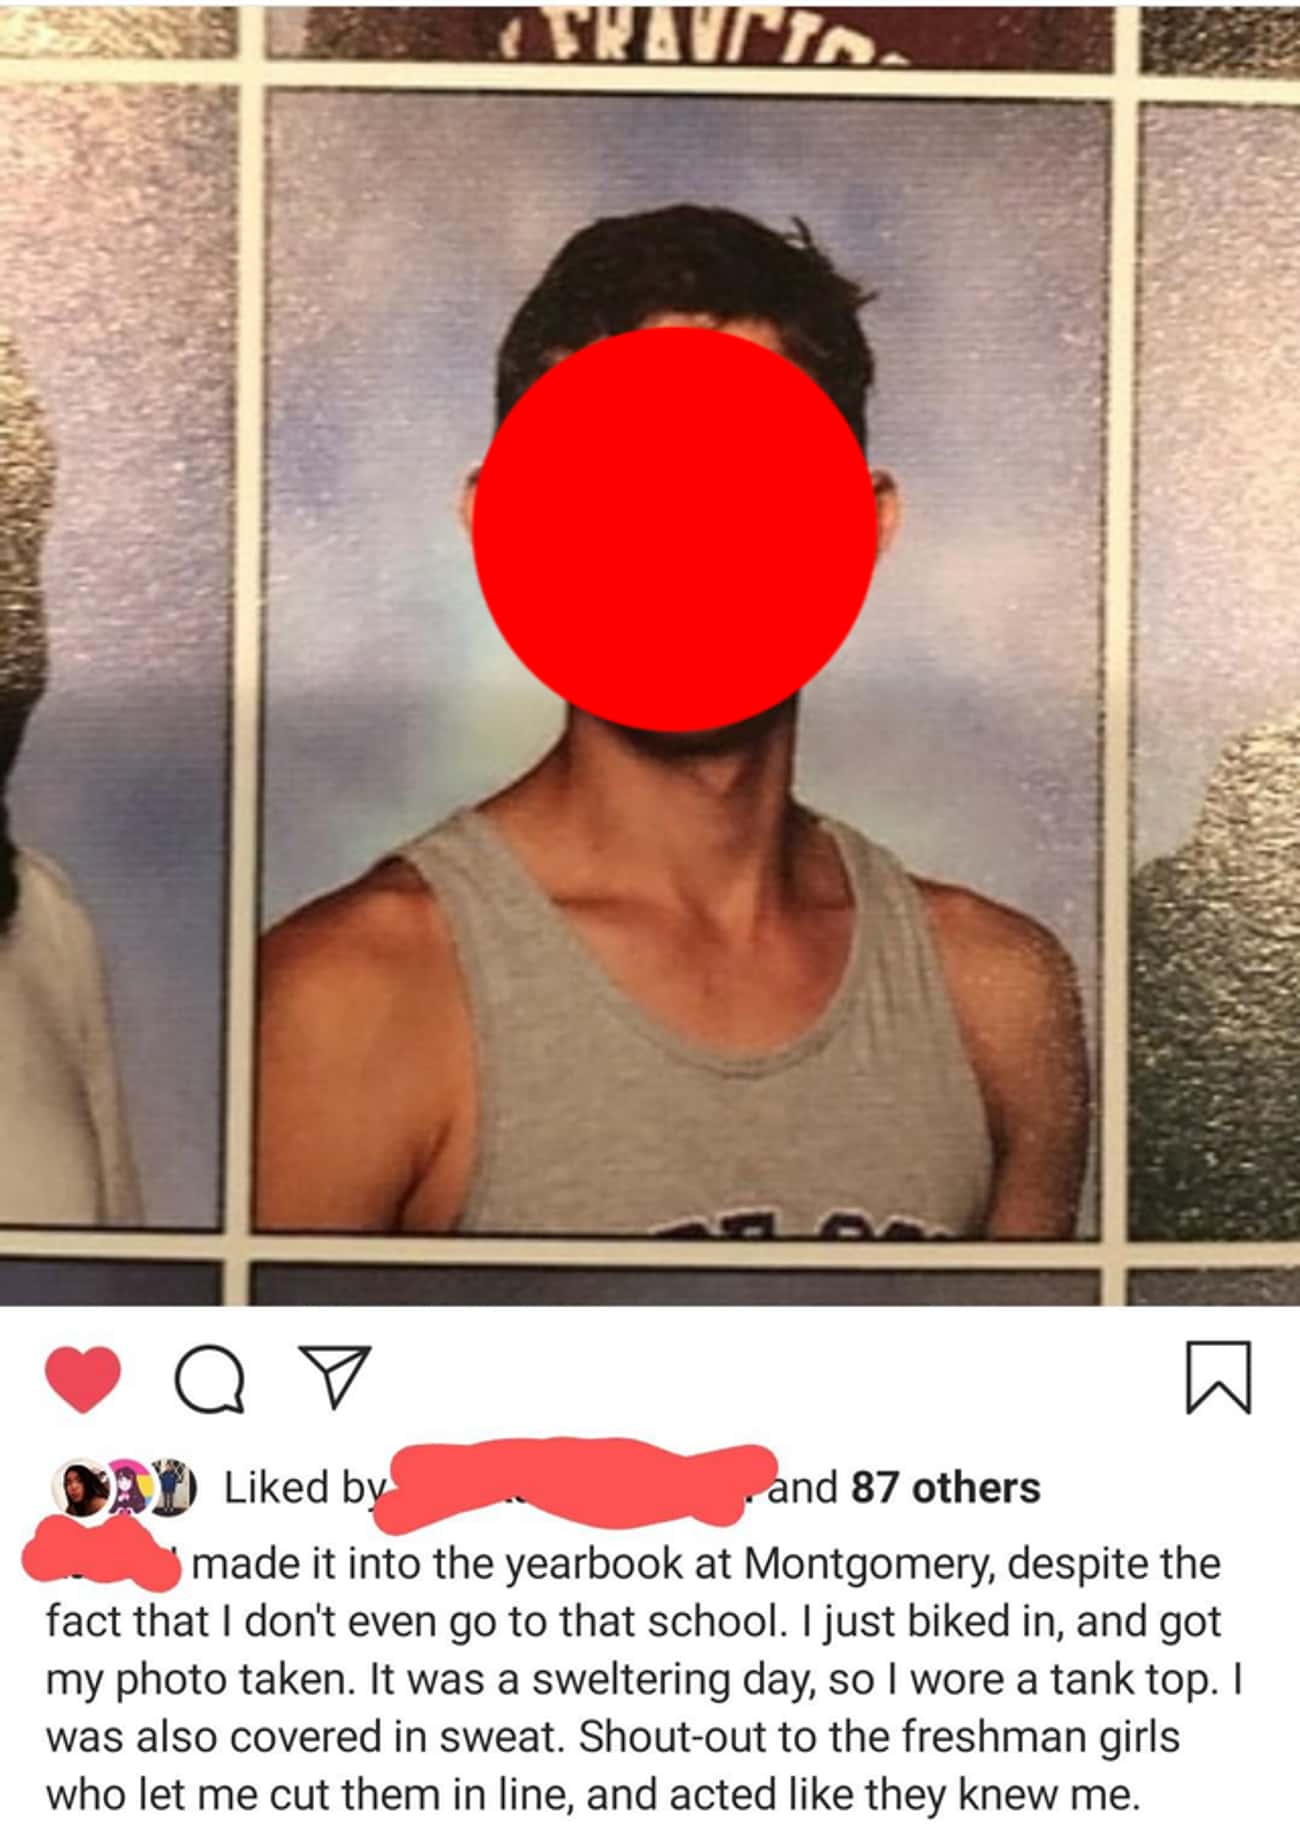 In A Yearbook Of A School He Doesn't Go To